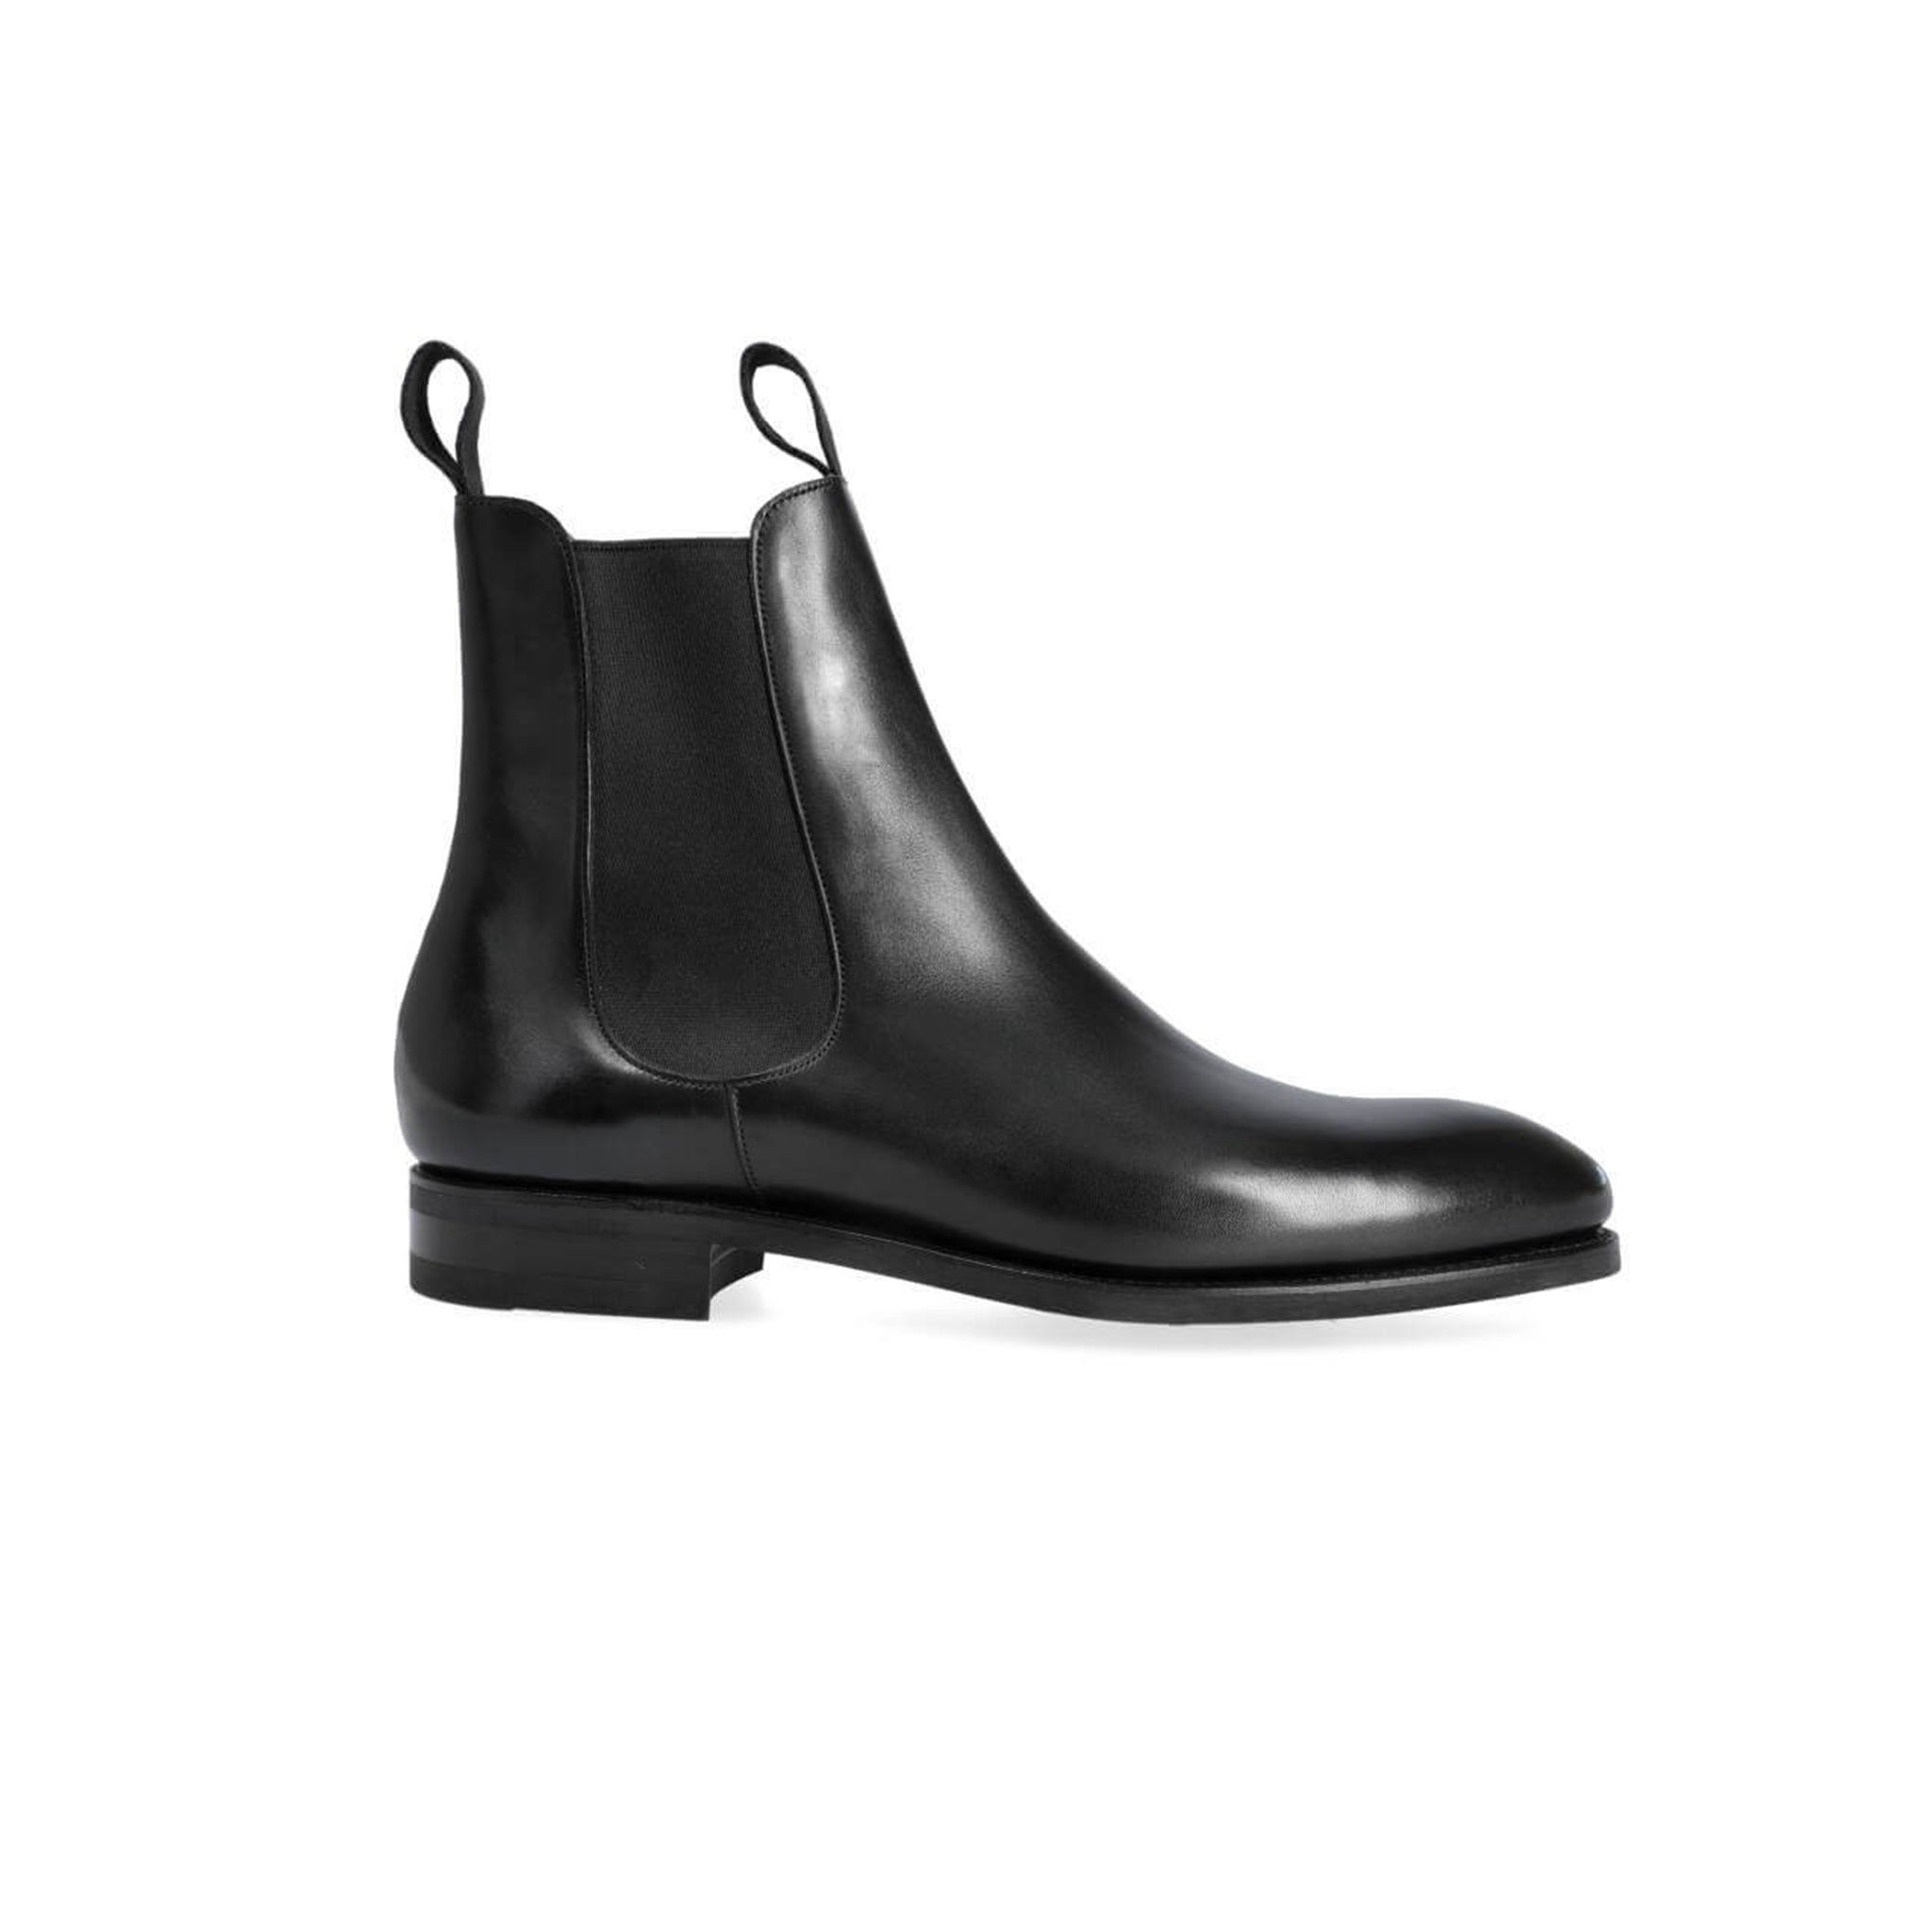 Midnight Classic Chelsea Black Leather Boots